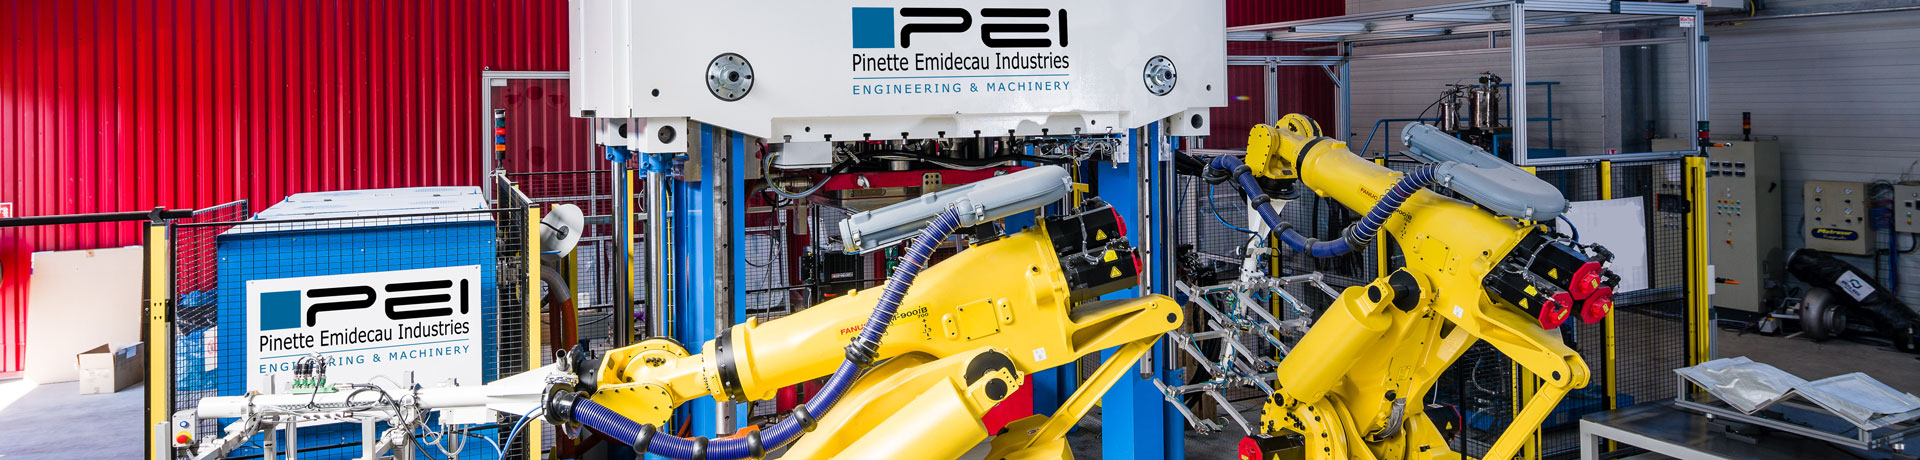 PINETTE PEI is a supplier of hydraulic press and automated press systems from 10 to 100,000 kN dedicated to composites preforming and forming.